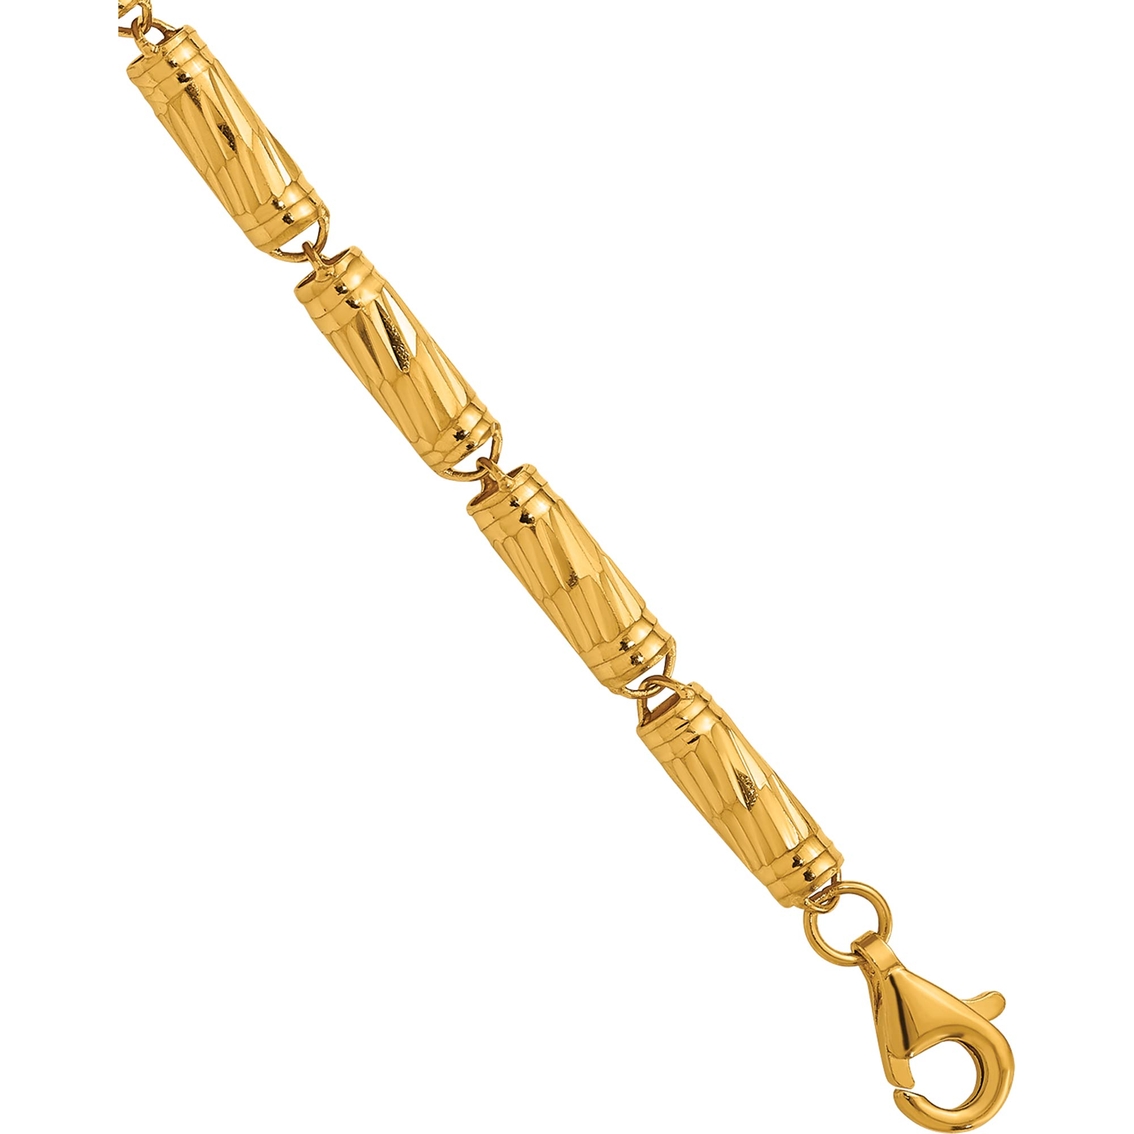 24K Pure Gold 18 in. Bamboo Link Chain Necklace - Image 4 of 6